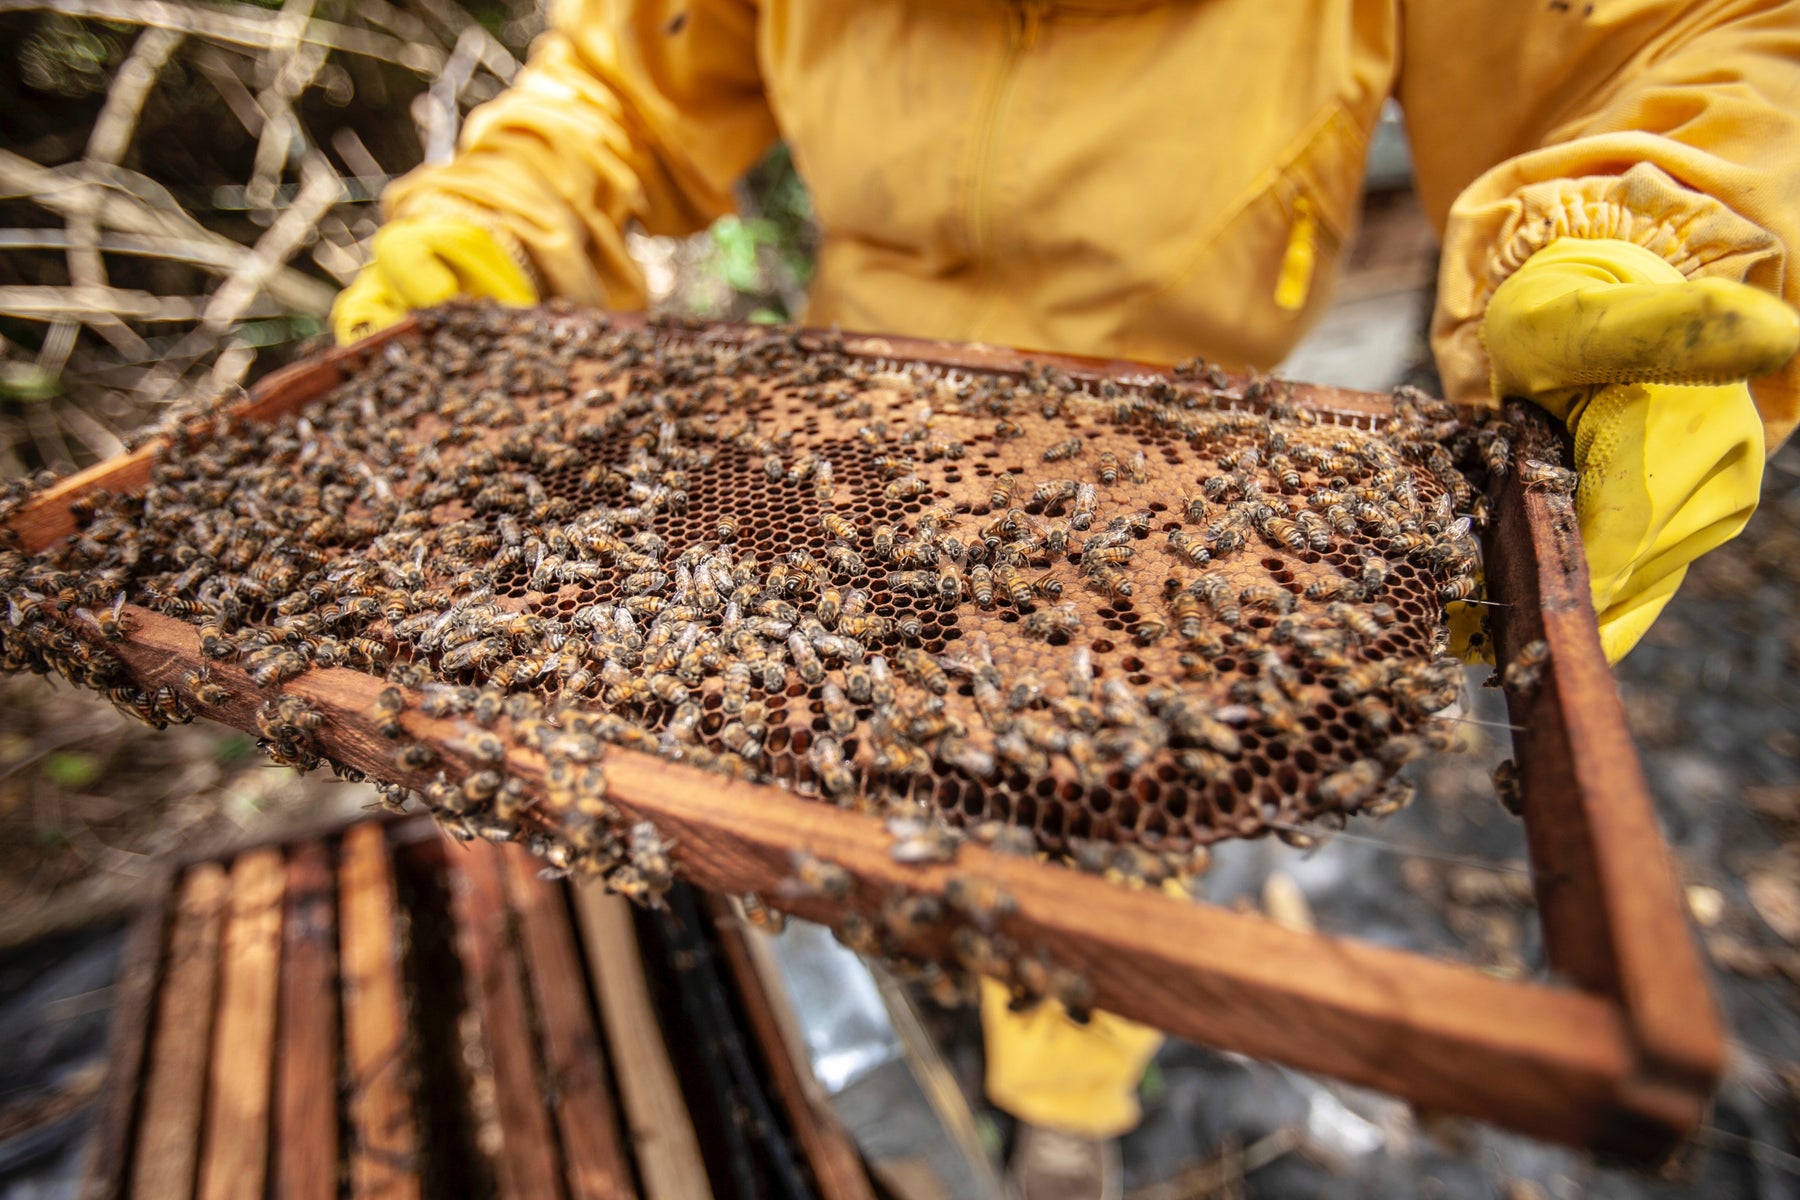 The Beekeeper's Guide to Splitting a Hive